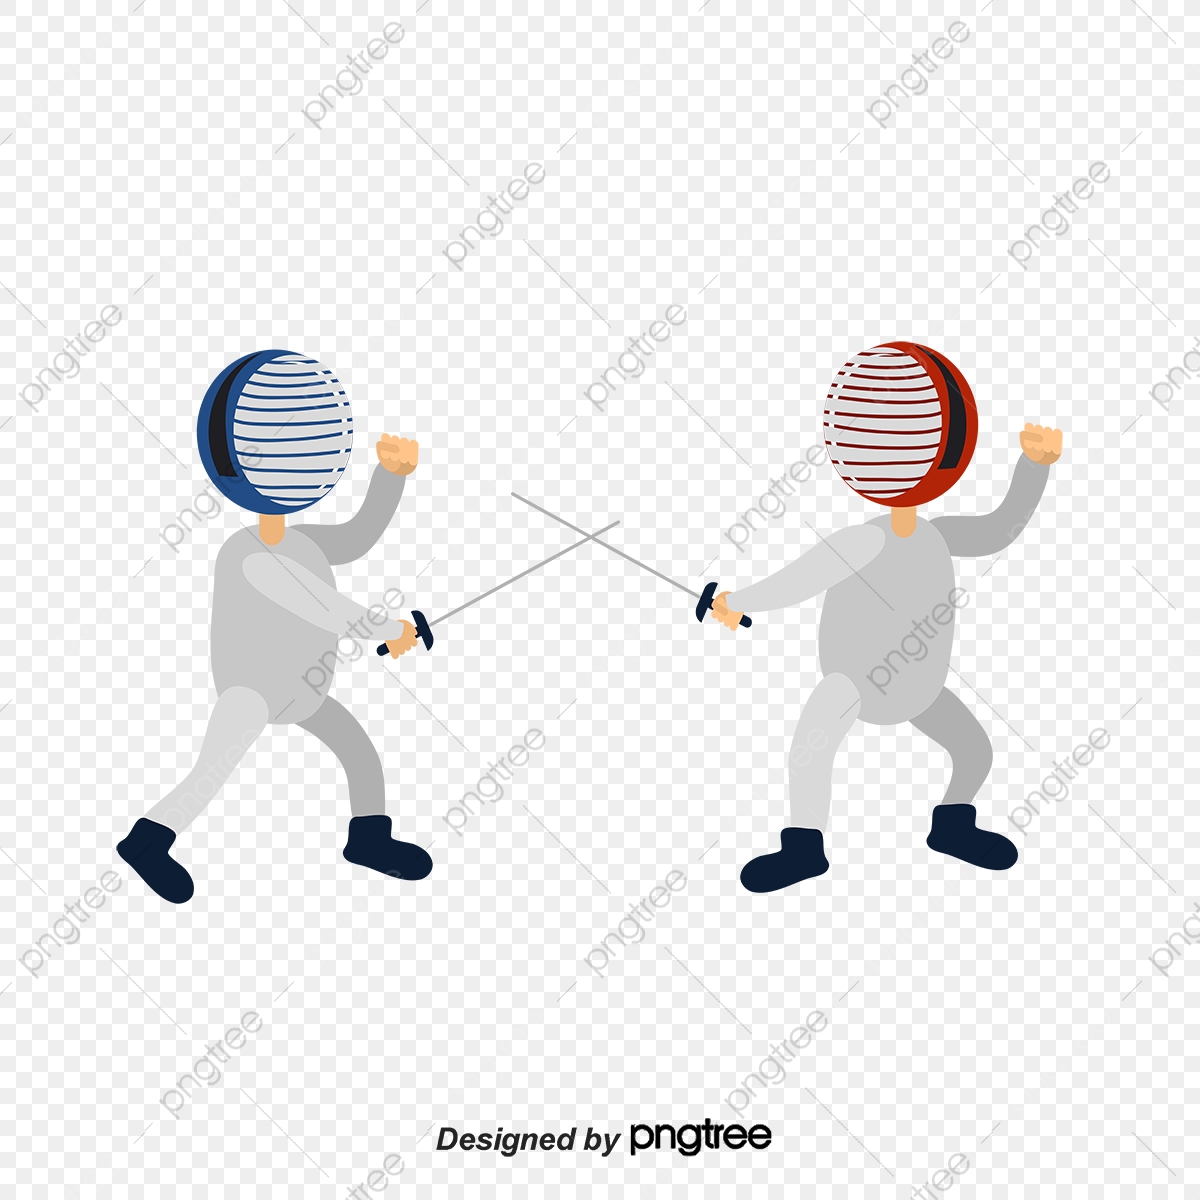 fencing clipart two